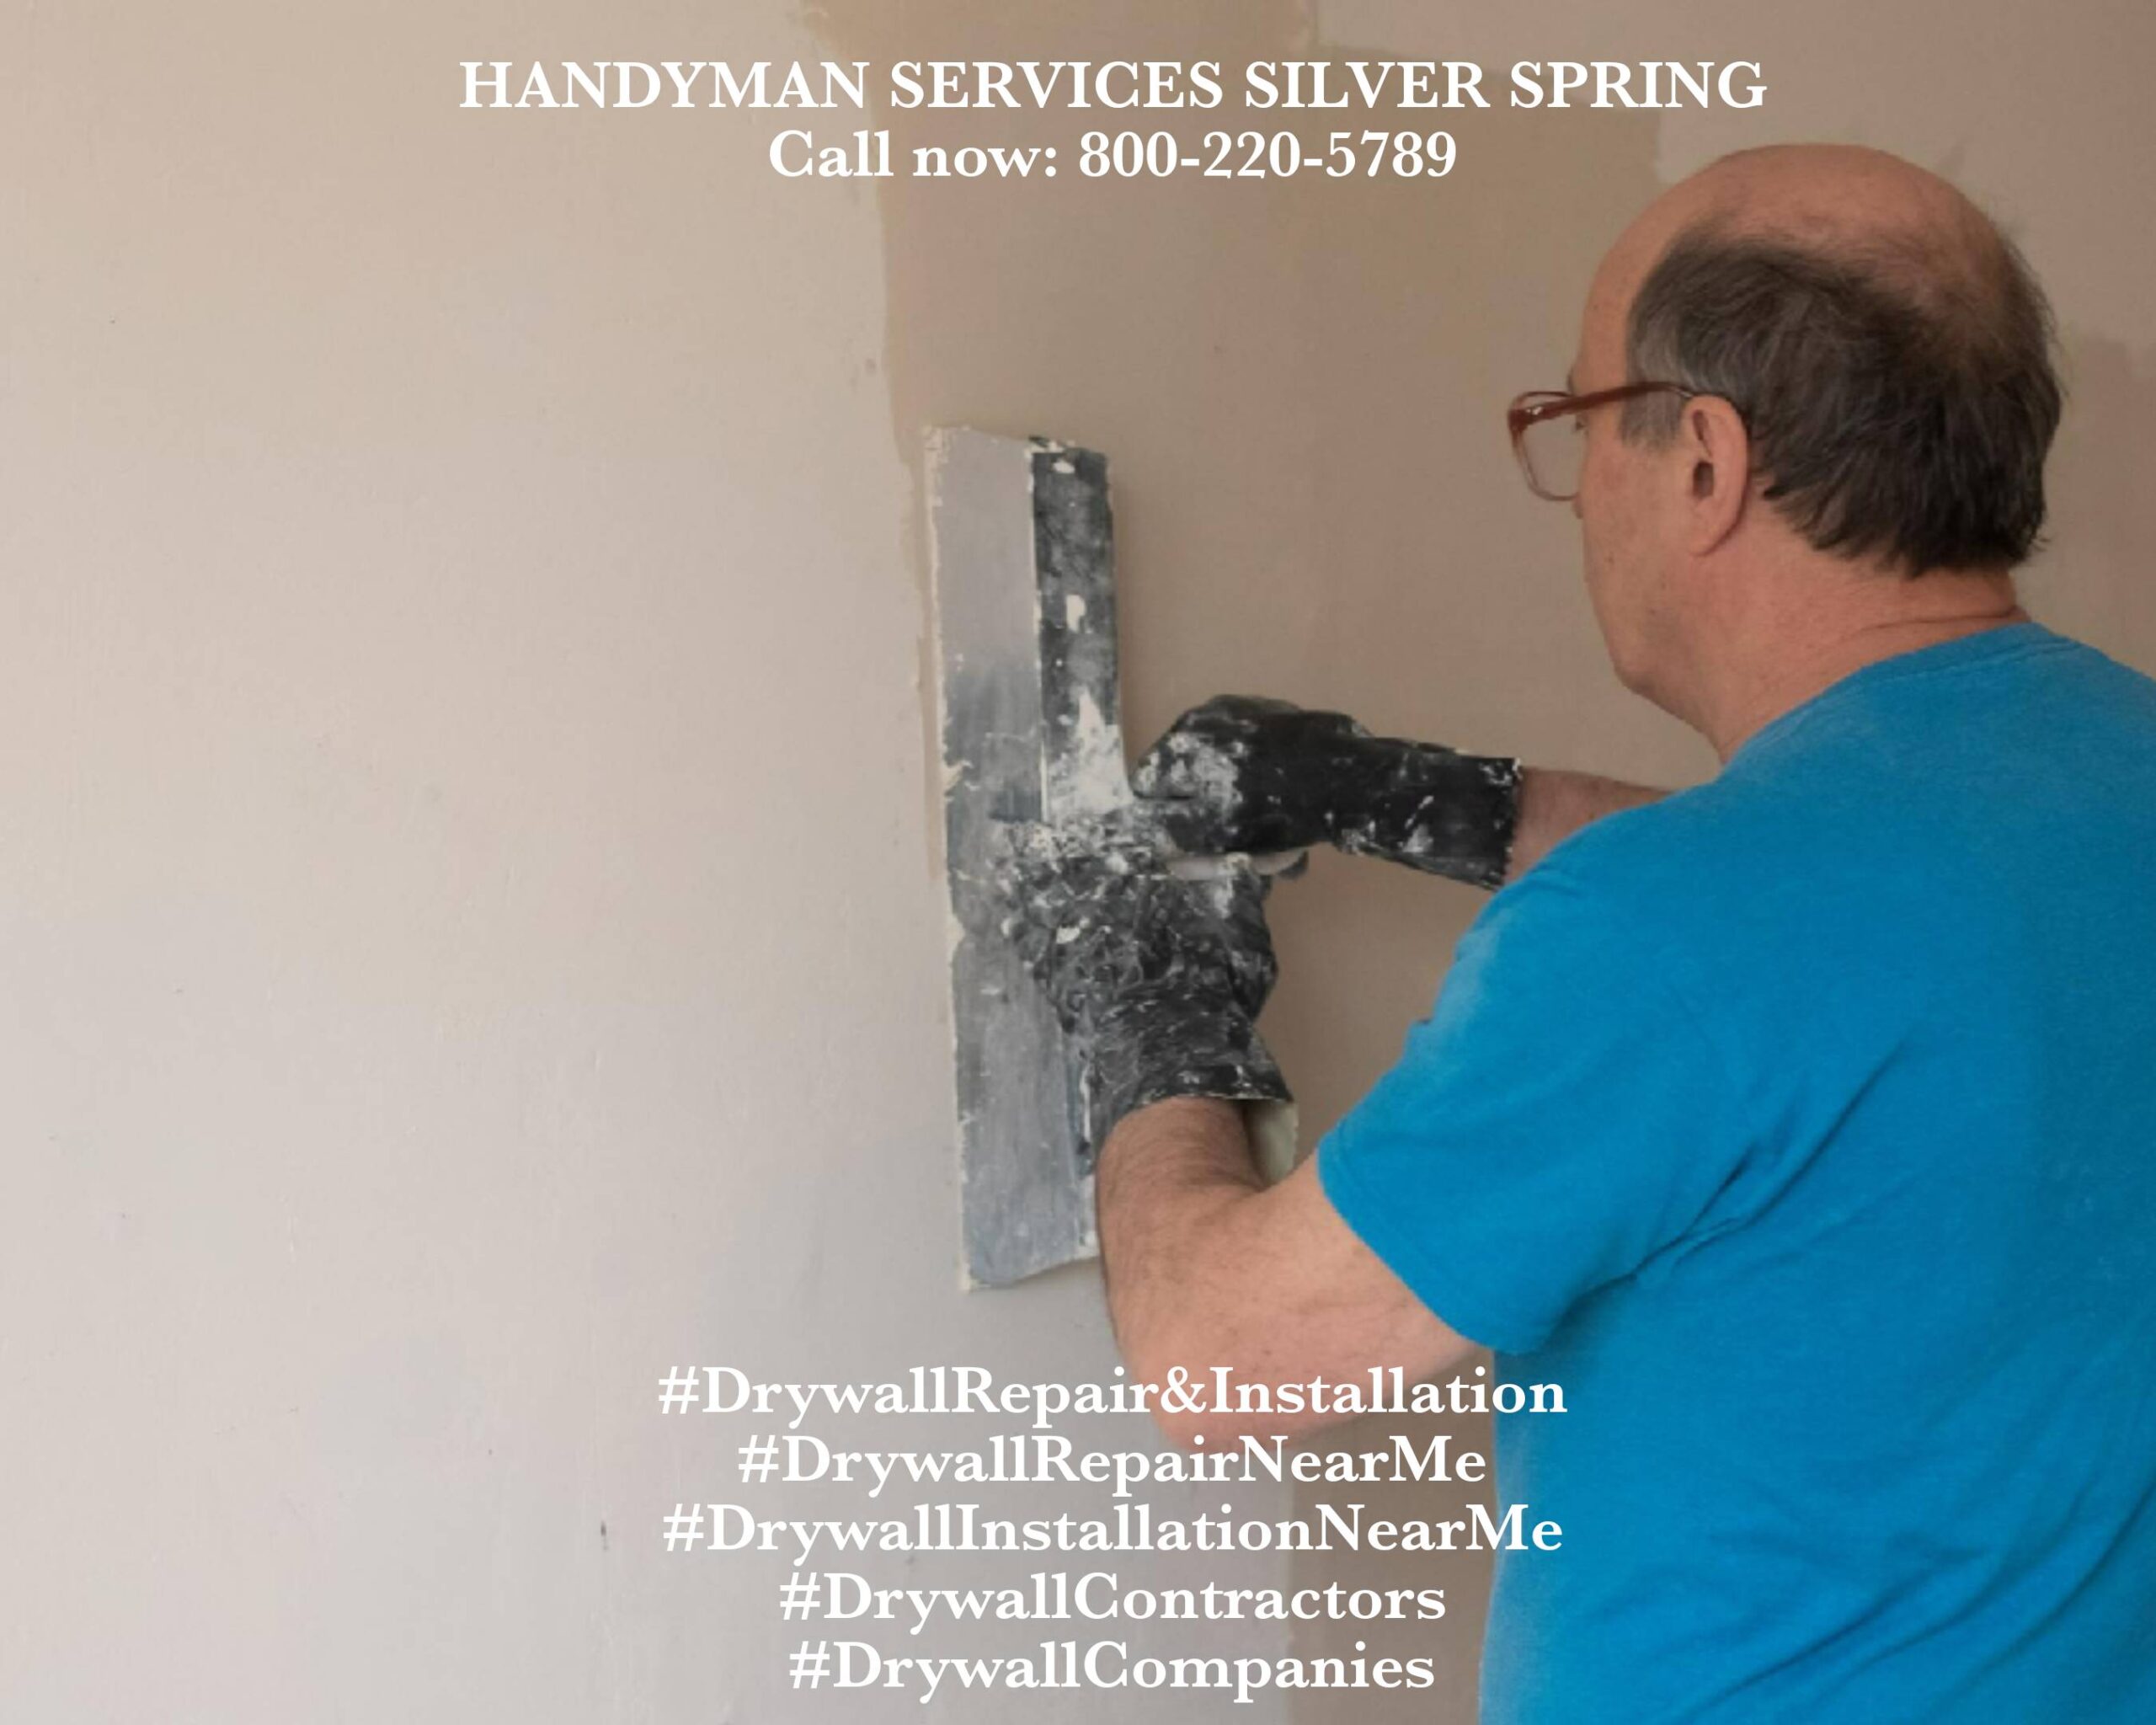 Hire Drywall Contractors & Avoid DIY/sliver spring